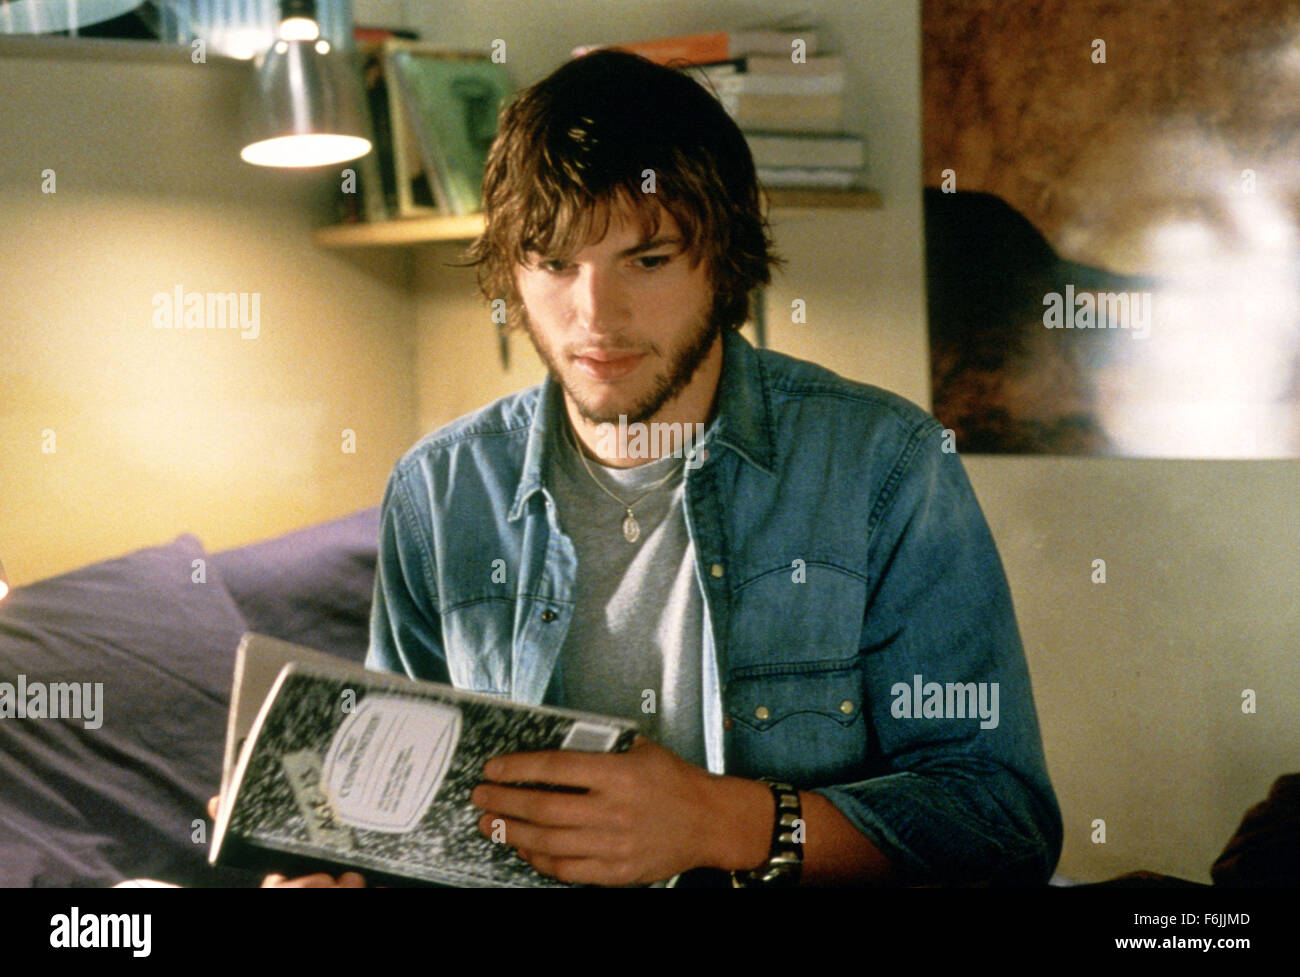 RELEASE DATE: January 23, 2004. MOVIE TITLE: The Butterfly Effect. STUDIO: BenderSpink. PLOT: A young man blocks out harmful memories of significant events of his life. As he grows up, he finds a way to remember these lost memories and a supernatural way to alter his life. PICTURED: ASHTON KUTCHER holds a book as Evan Treborn. Stock Photo